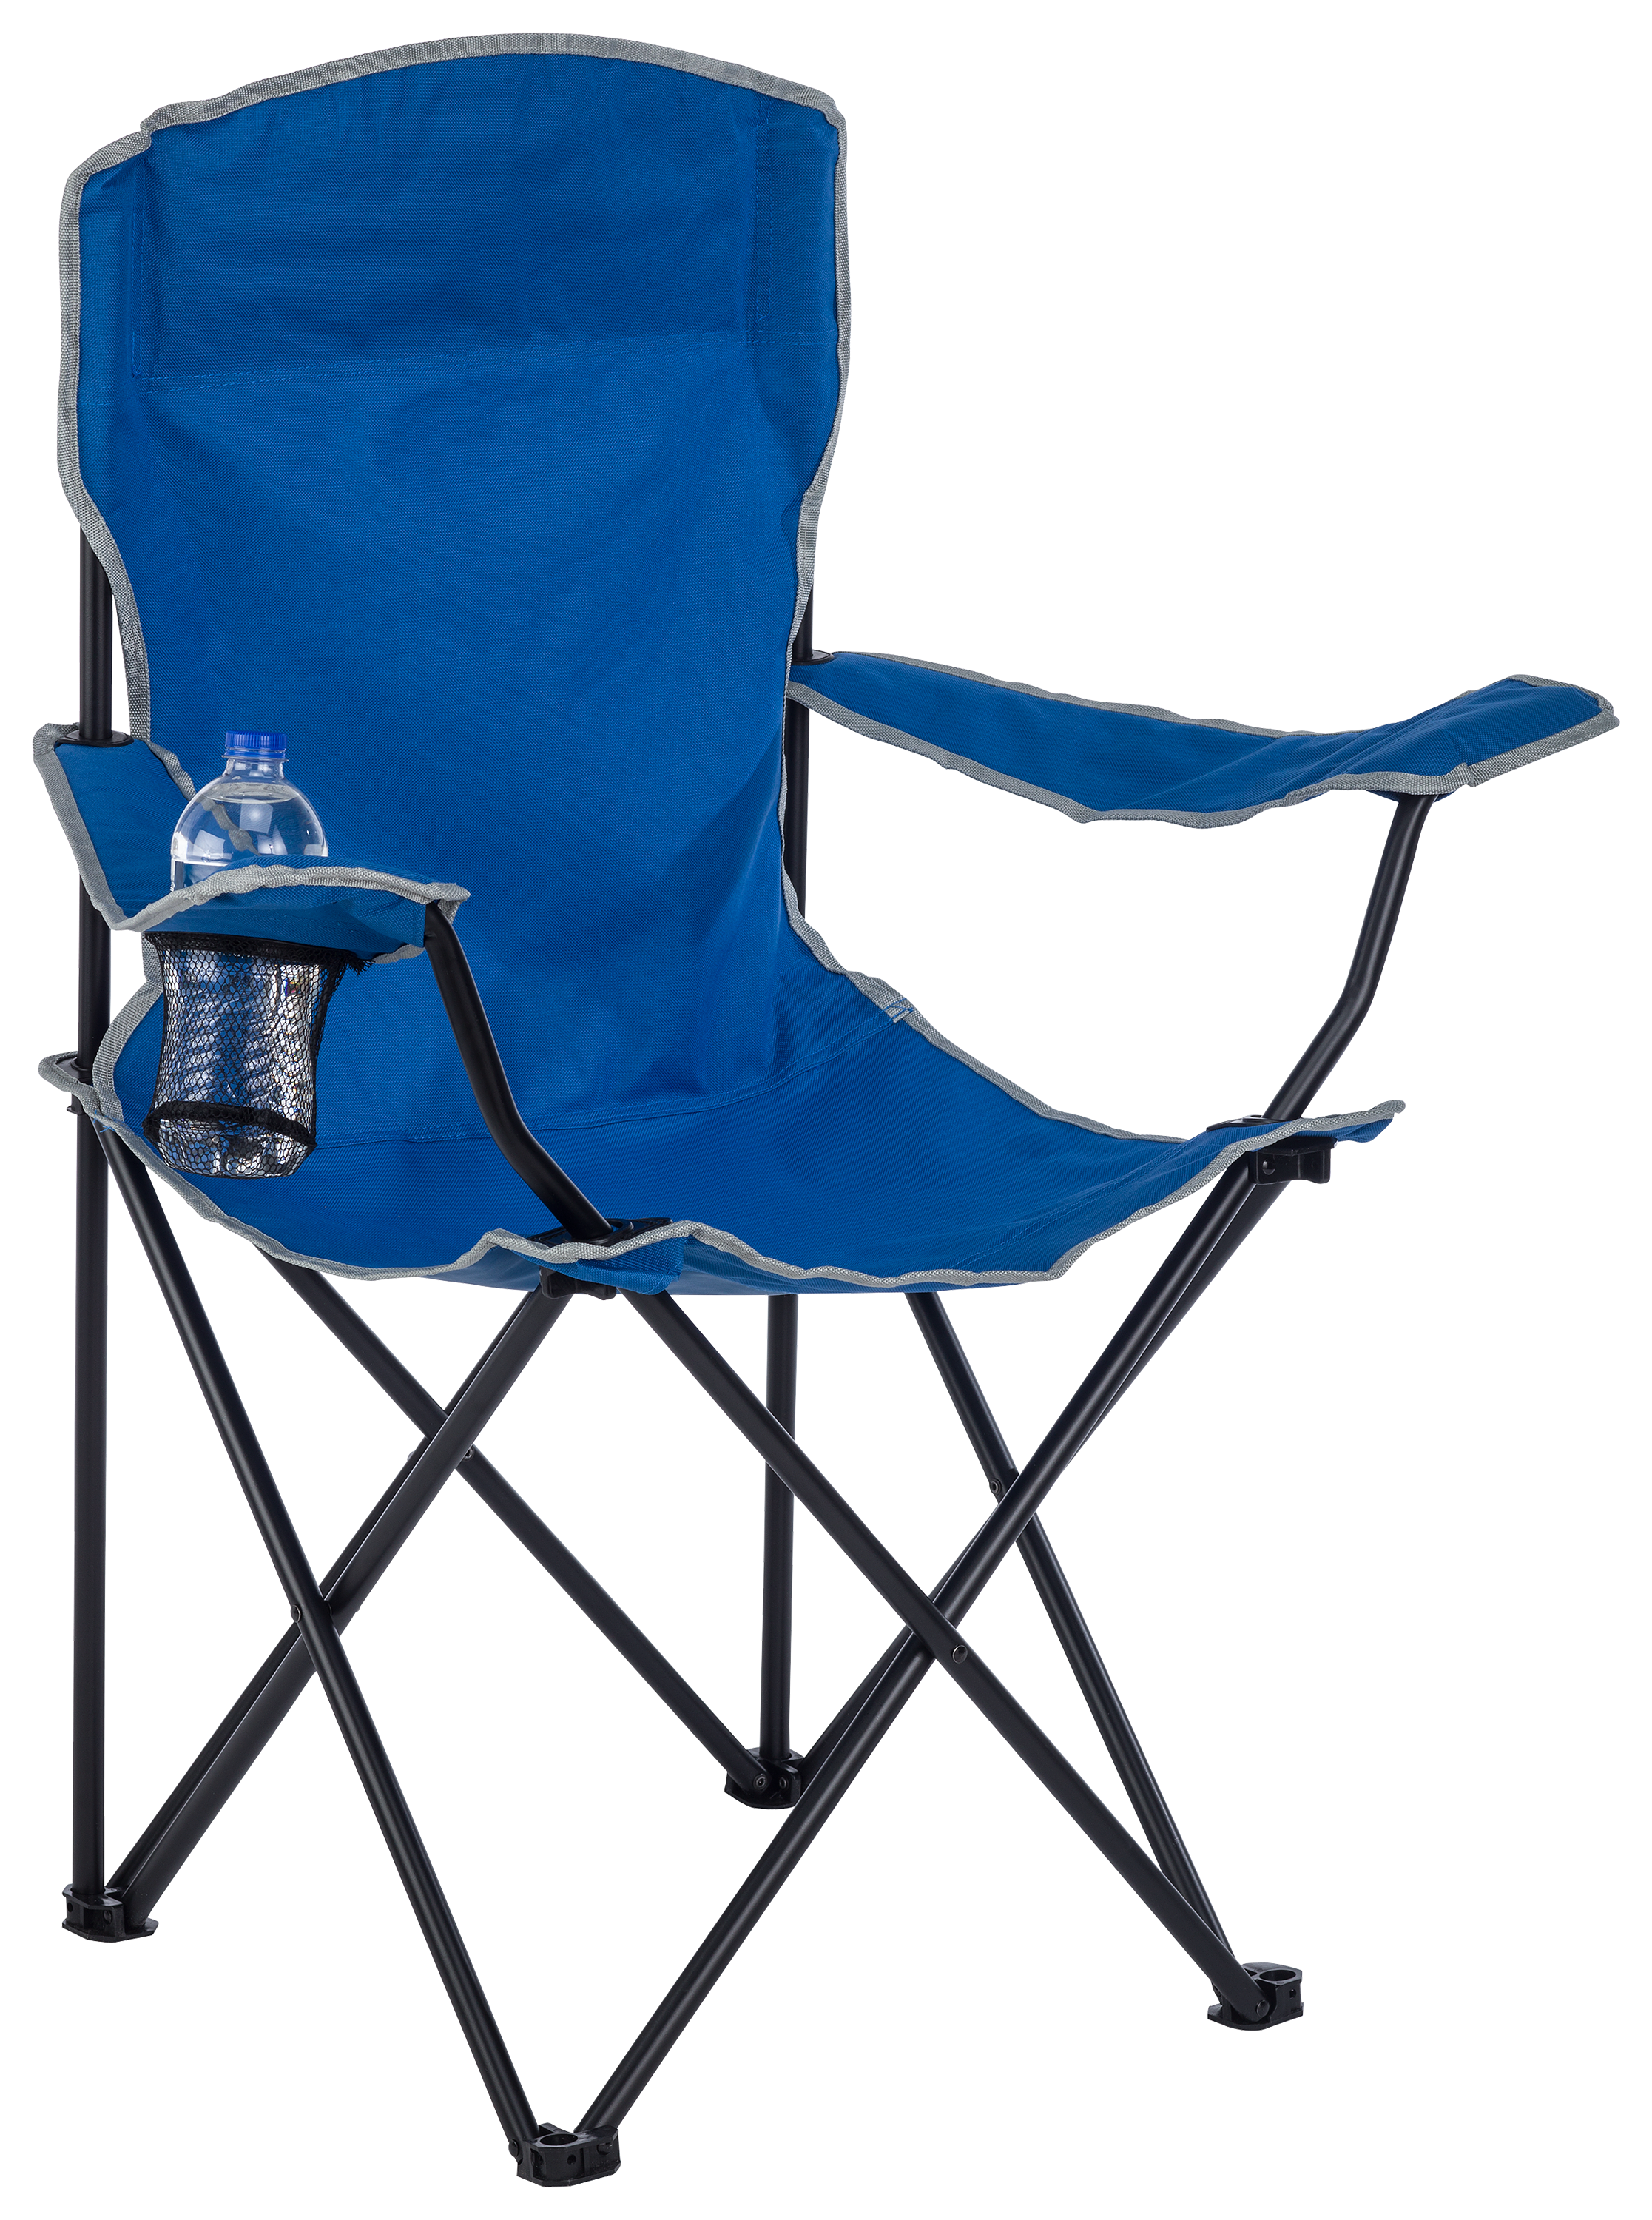 Foldable Camp Chair - Red